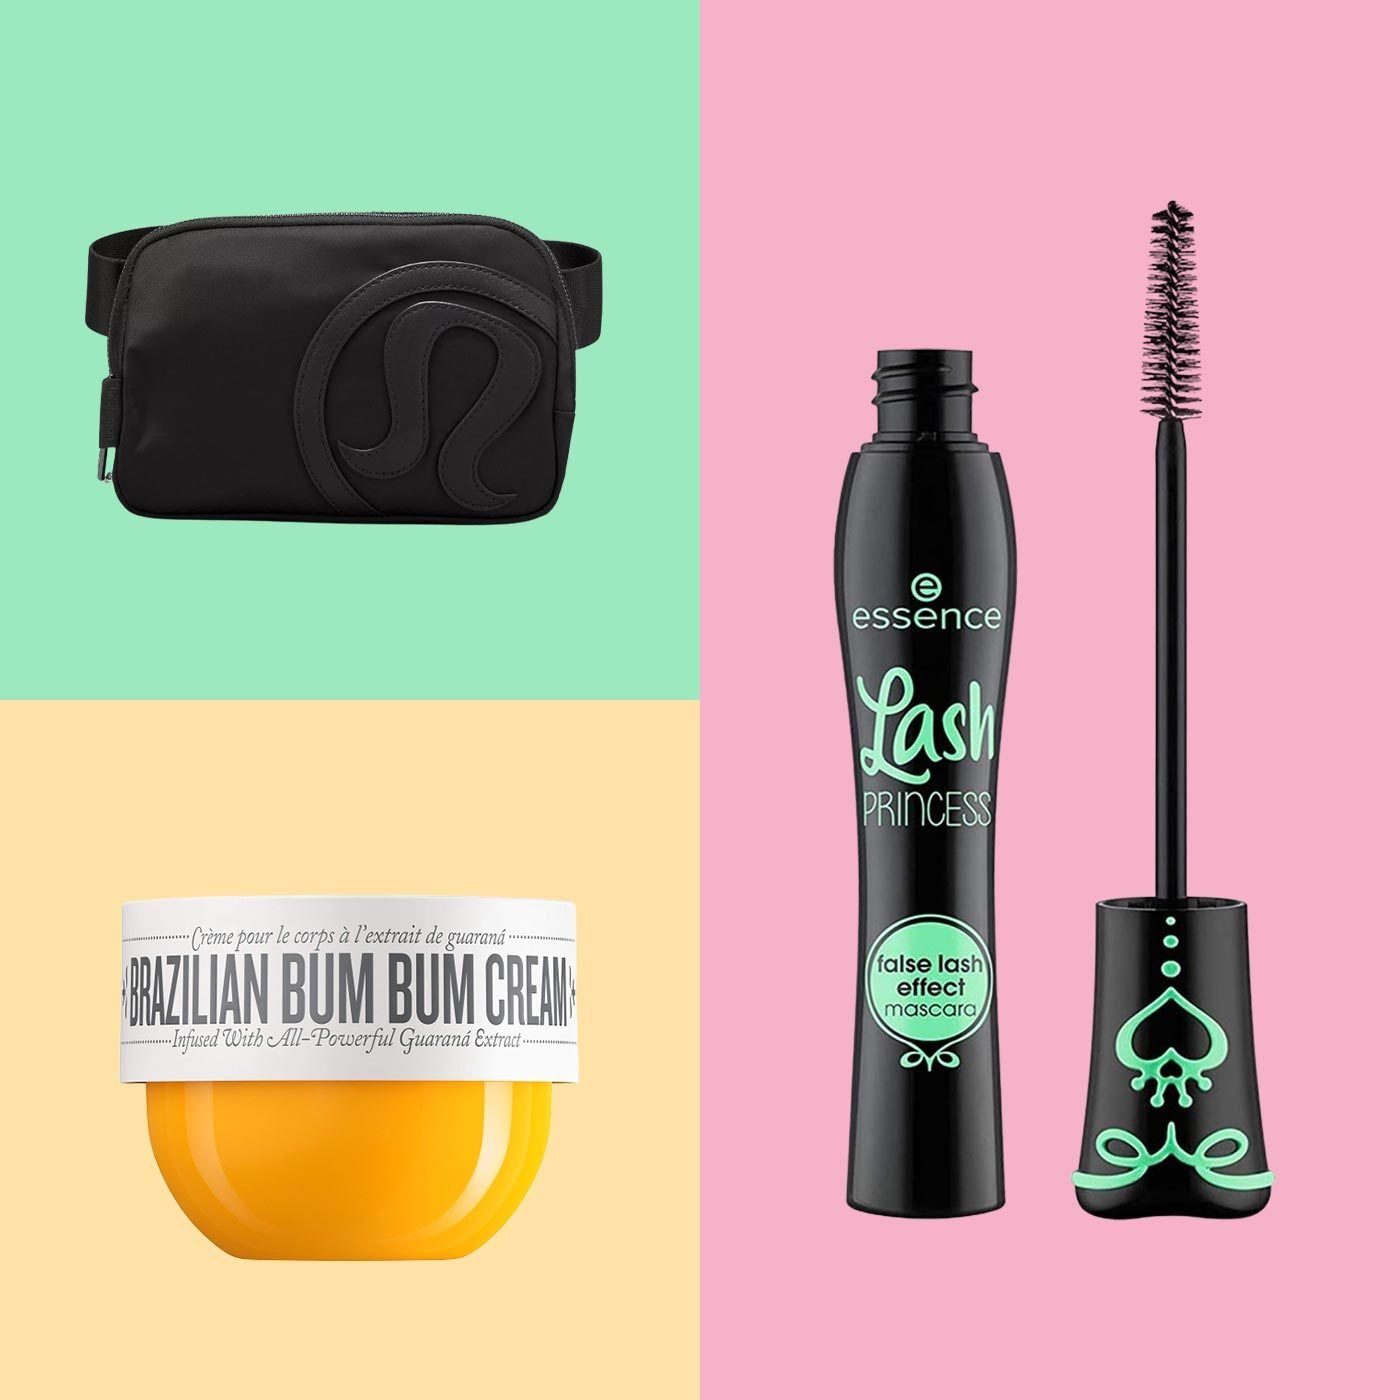 The best cult-favorite cleaning products at